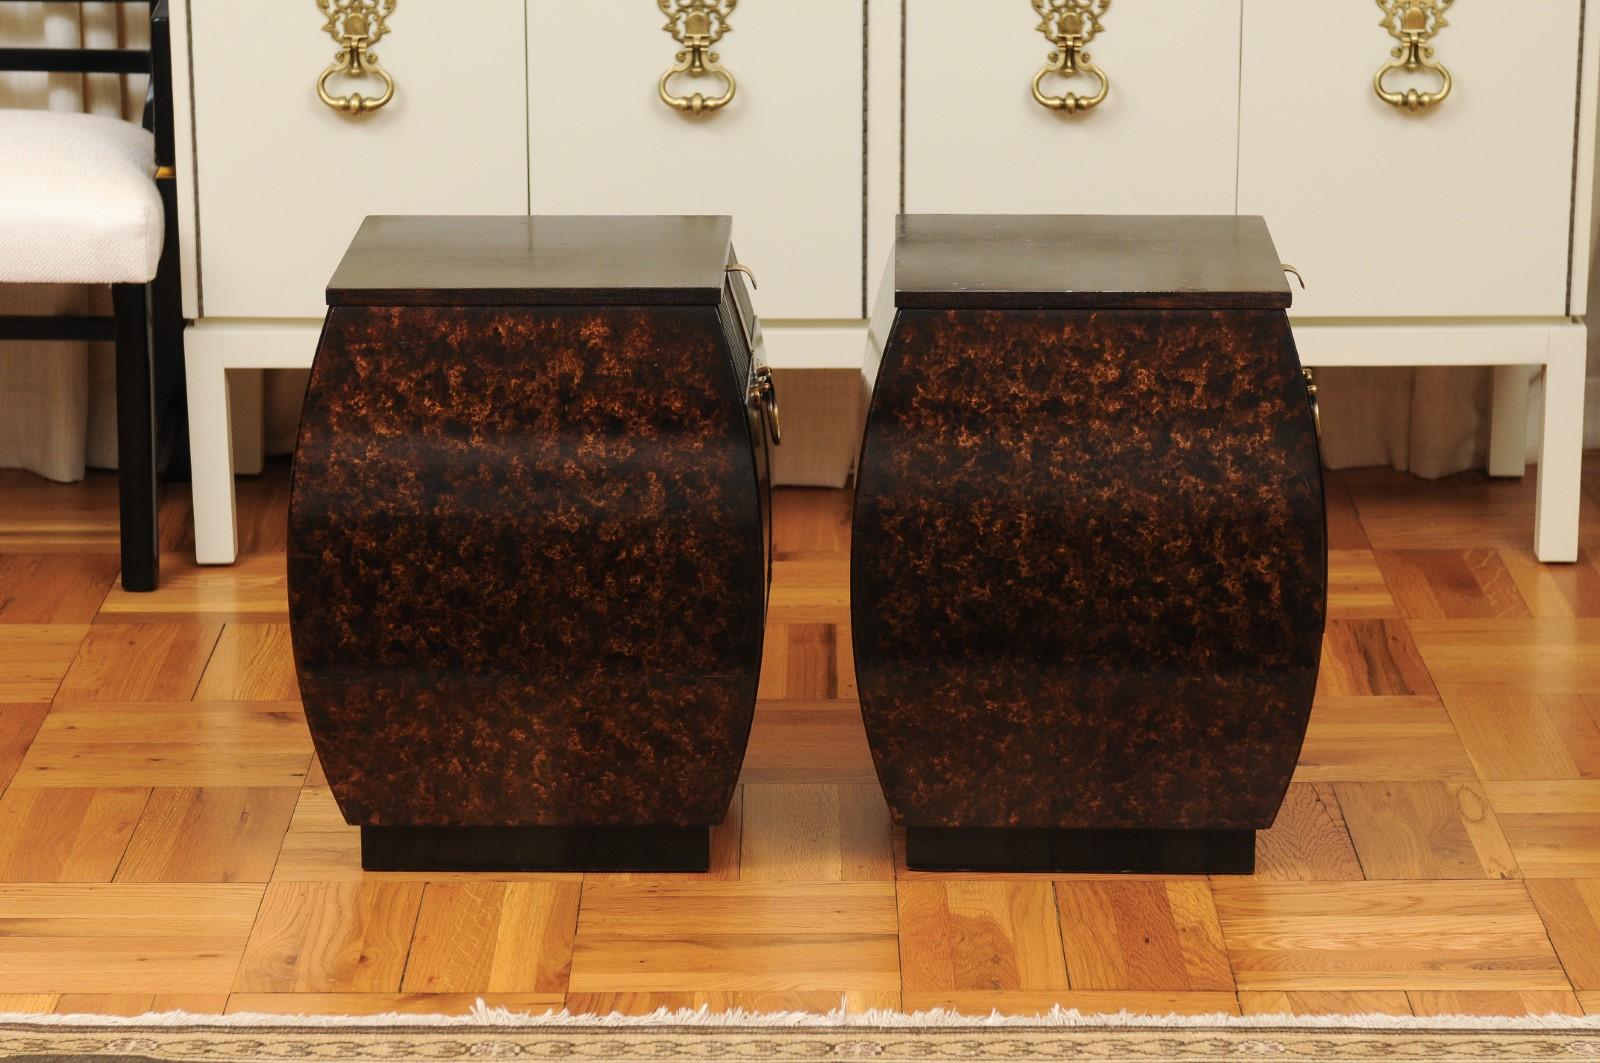 Exquisite Pair of Bombe Small Chests by Bert England for Widdicomb, circa 1965 In Excellent Condition For Sale In Atlanta, GA